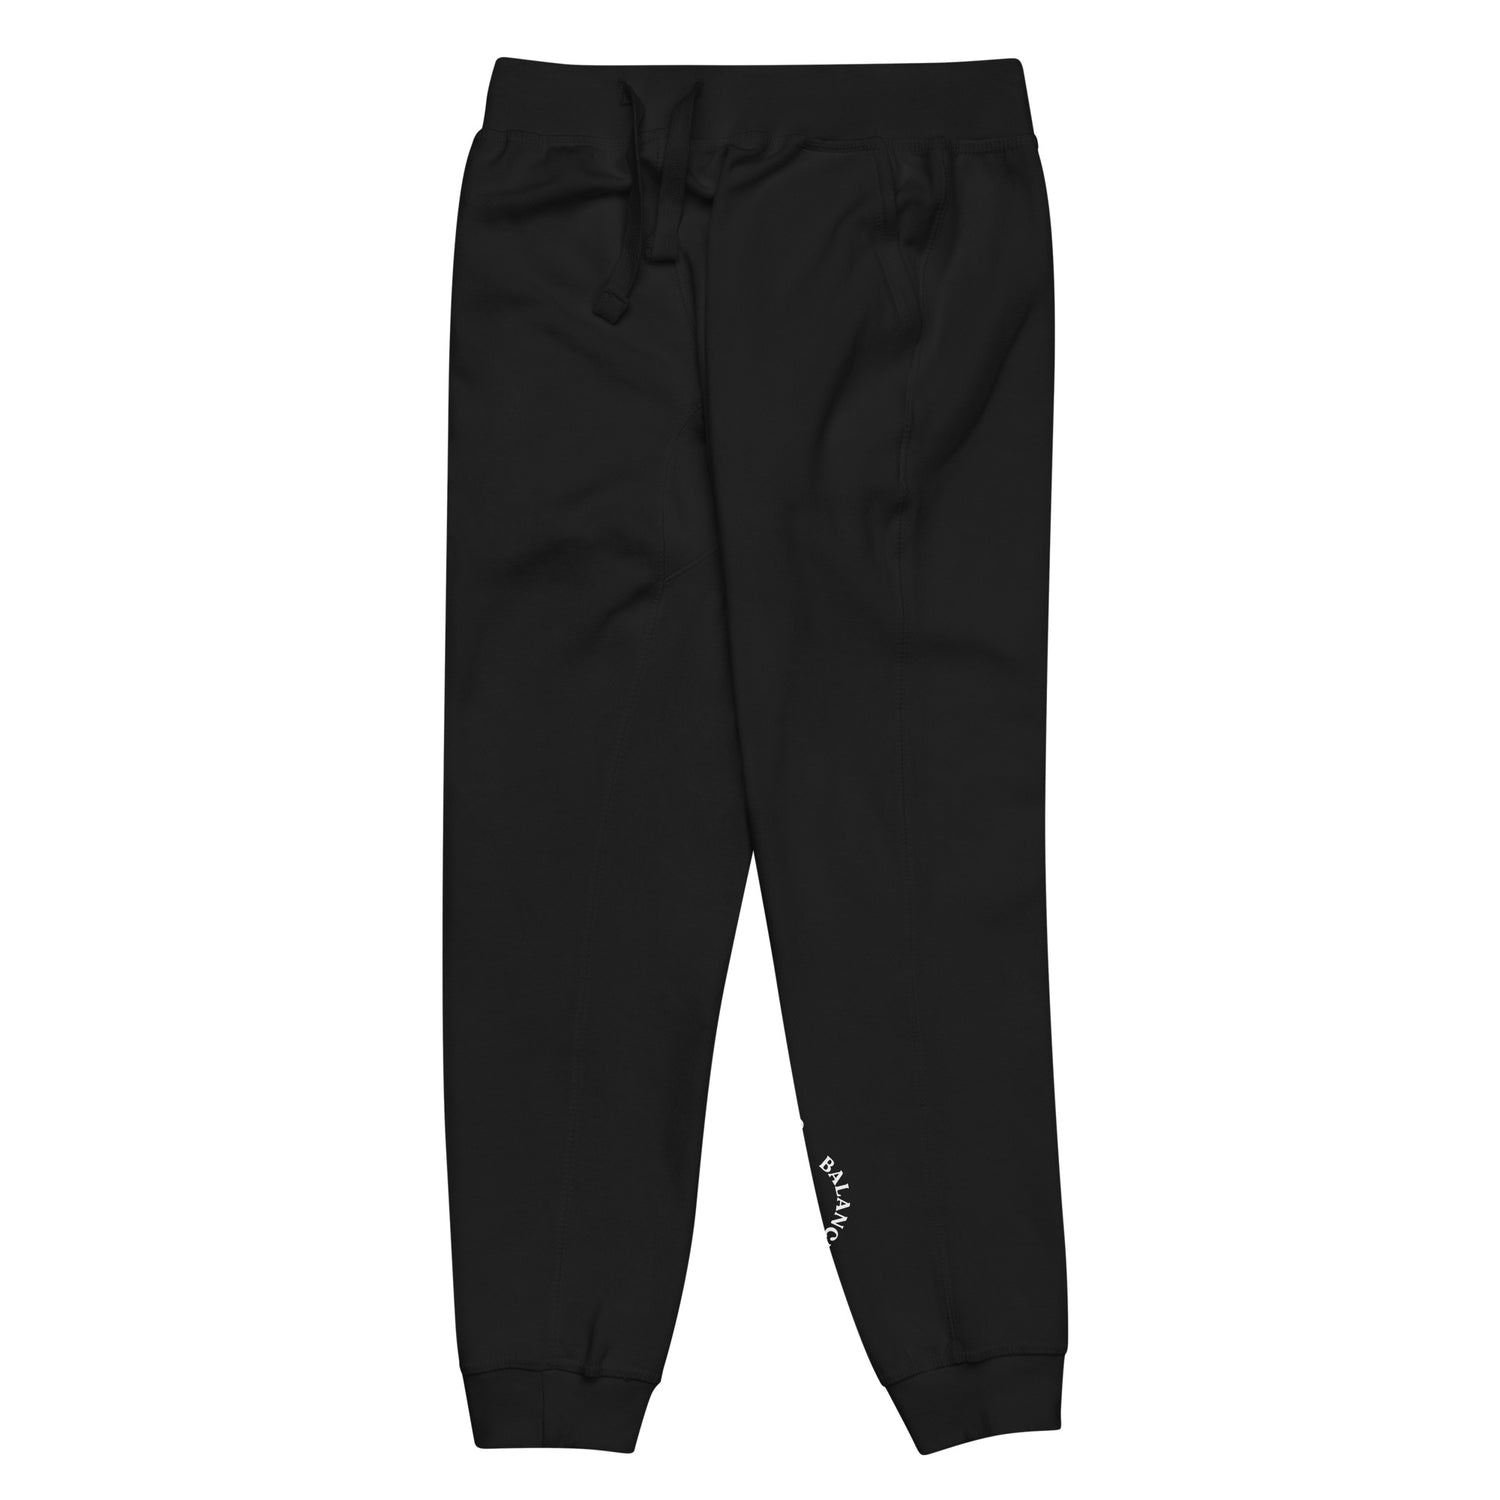 Side of full length Black sweat pant with pockets on side, featuring "Choose Balance" printed on left side lower leg.